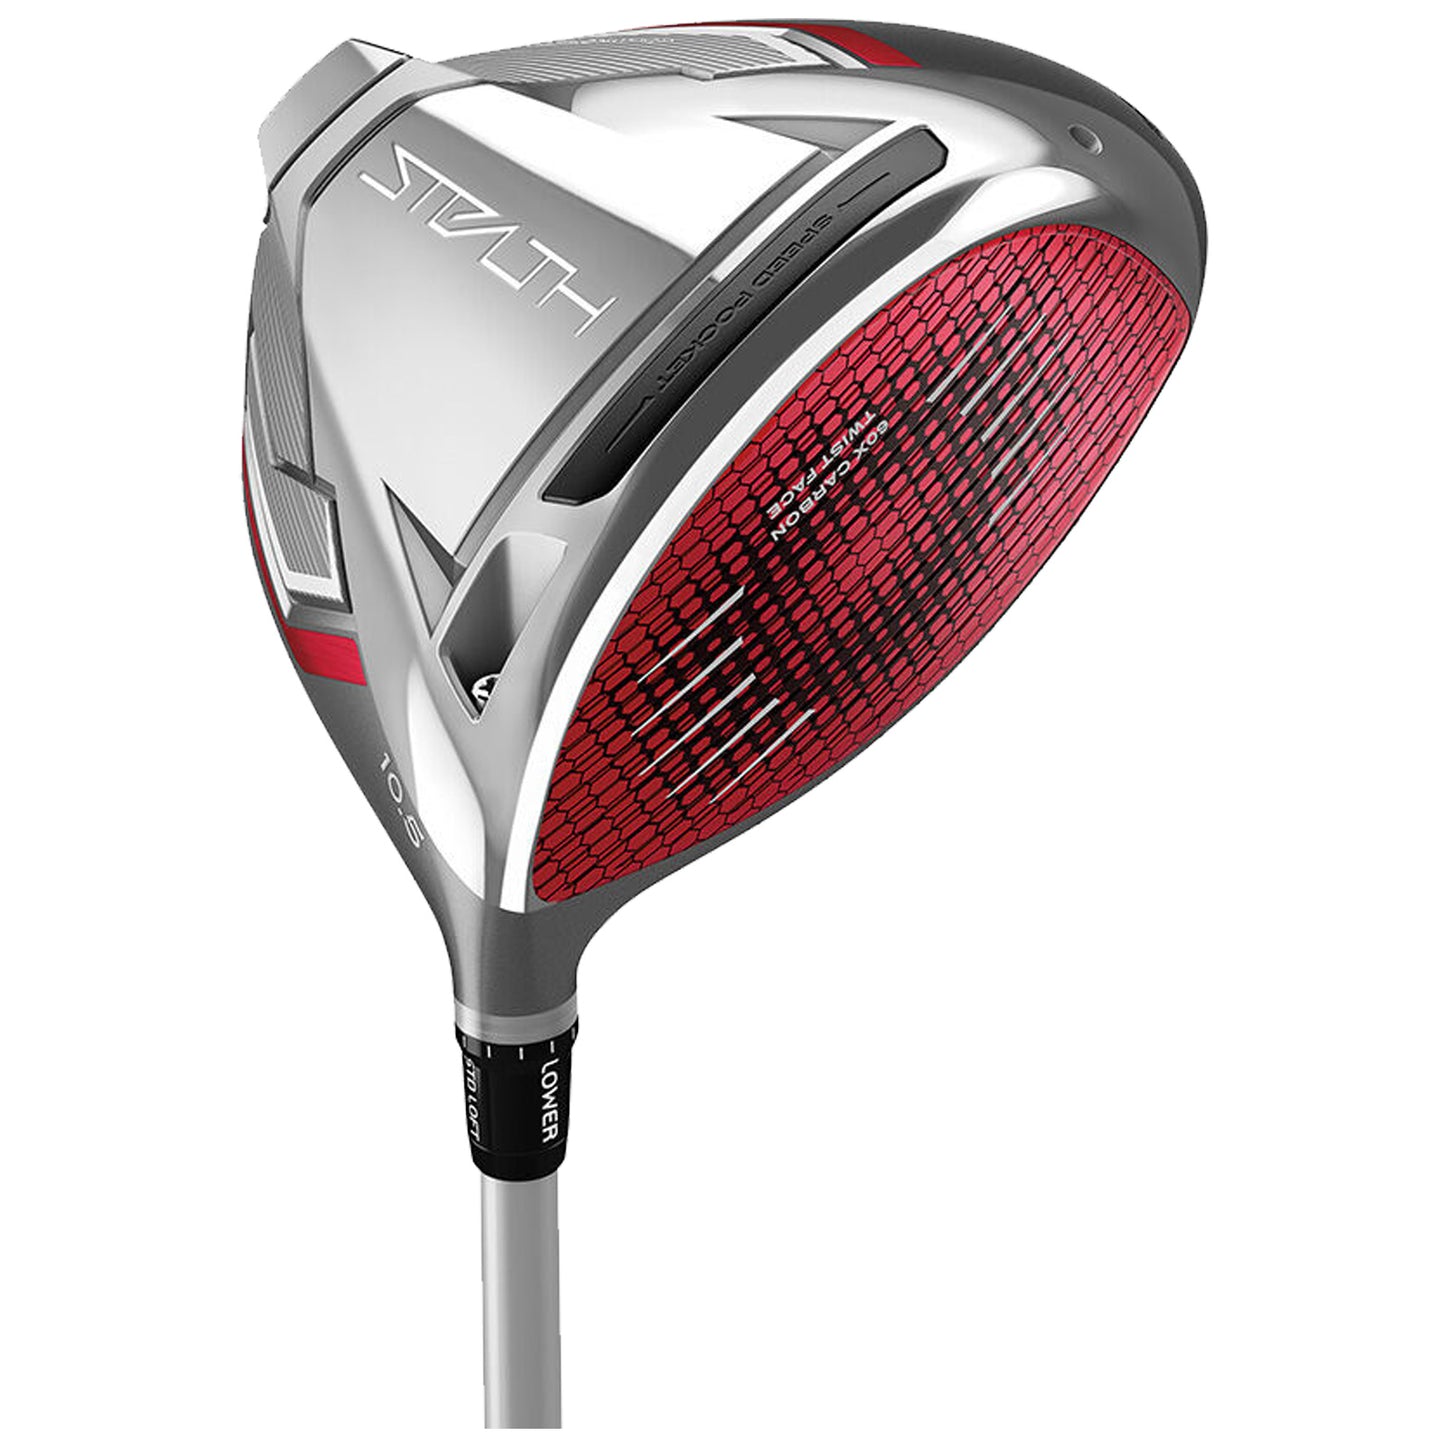 TaylorMade Ladies Stealth HD Driver